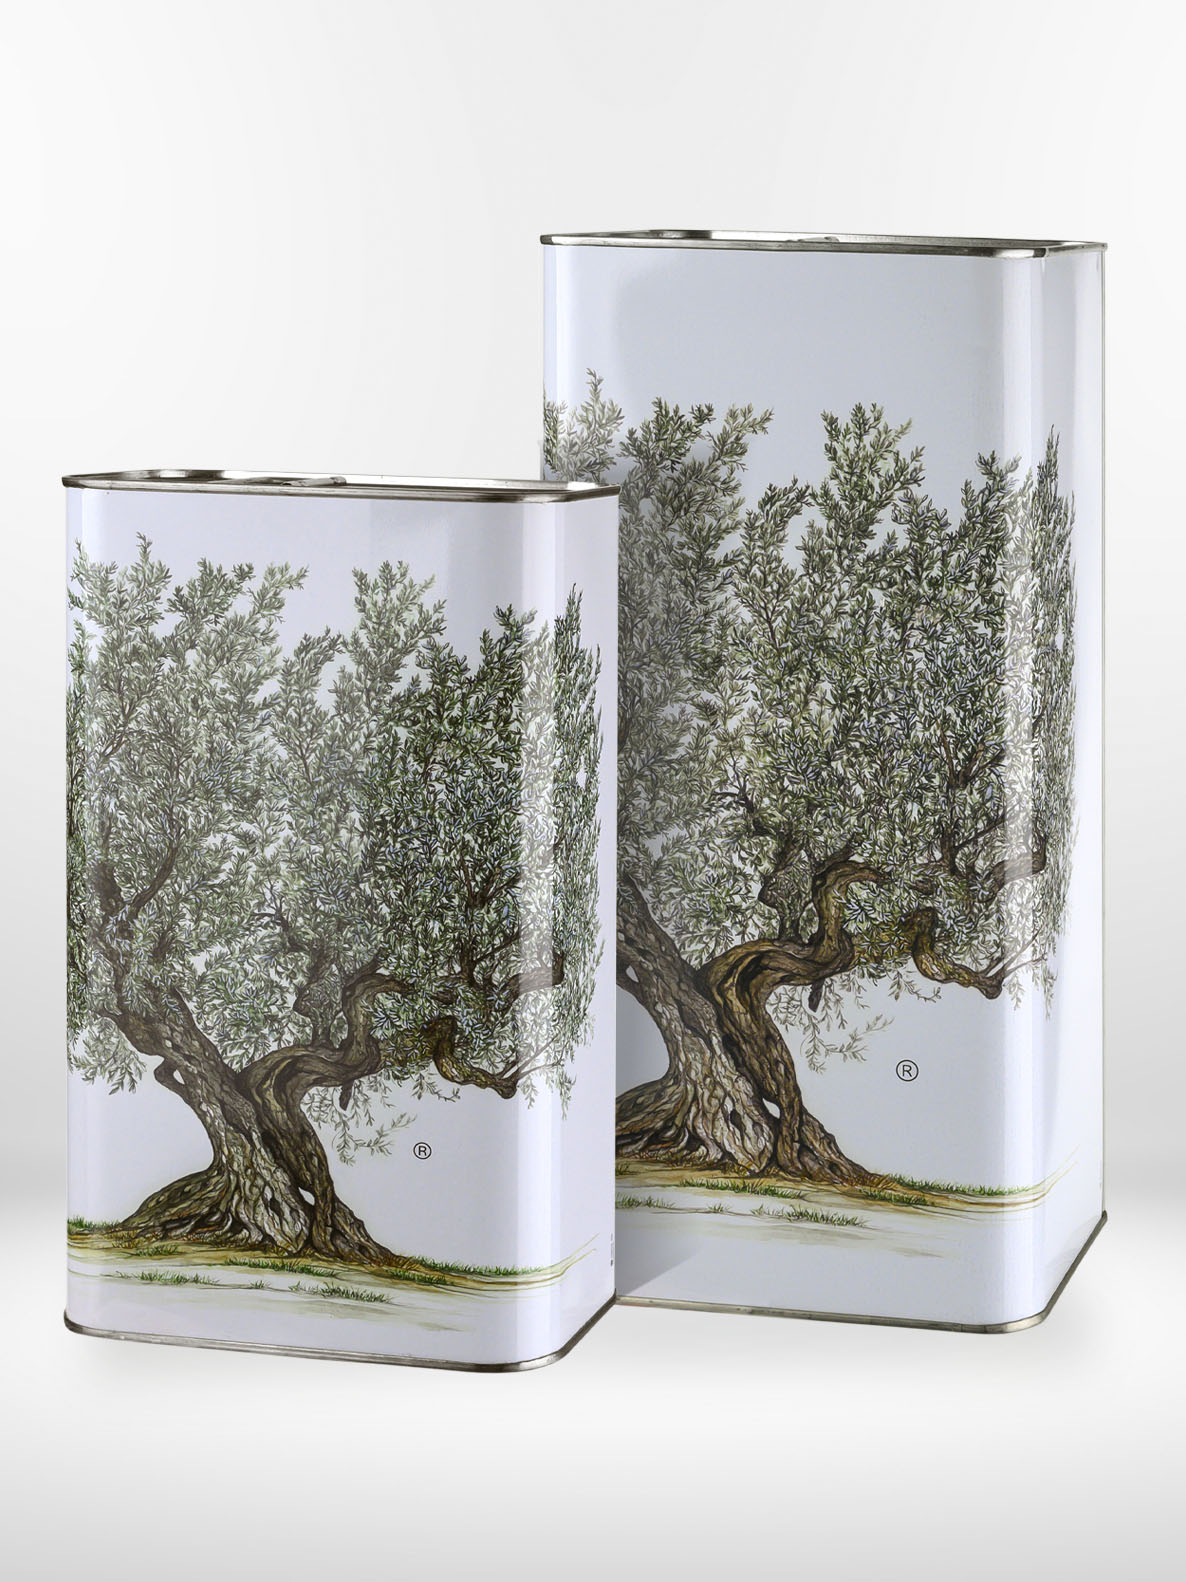 Two cans of olive oil with tree design. Olive oil can 5L, 3L, agridue Puglia.